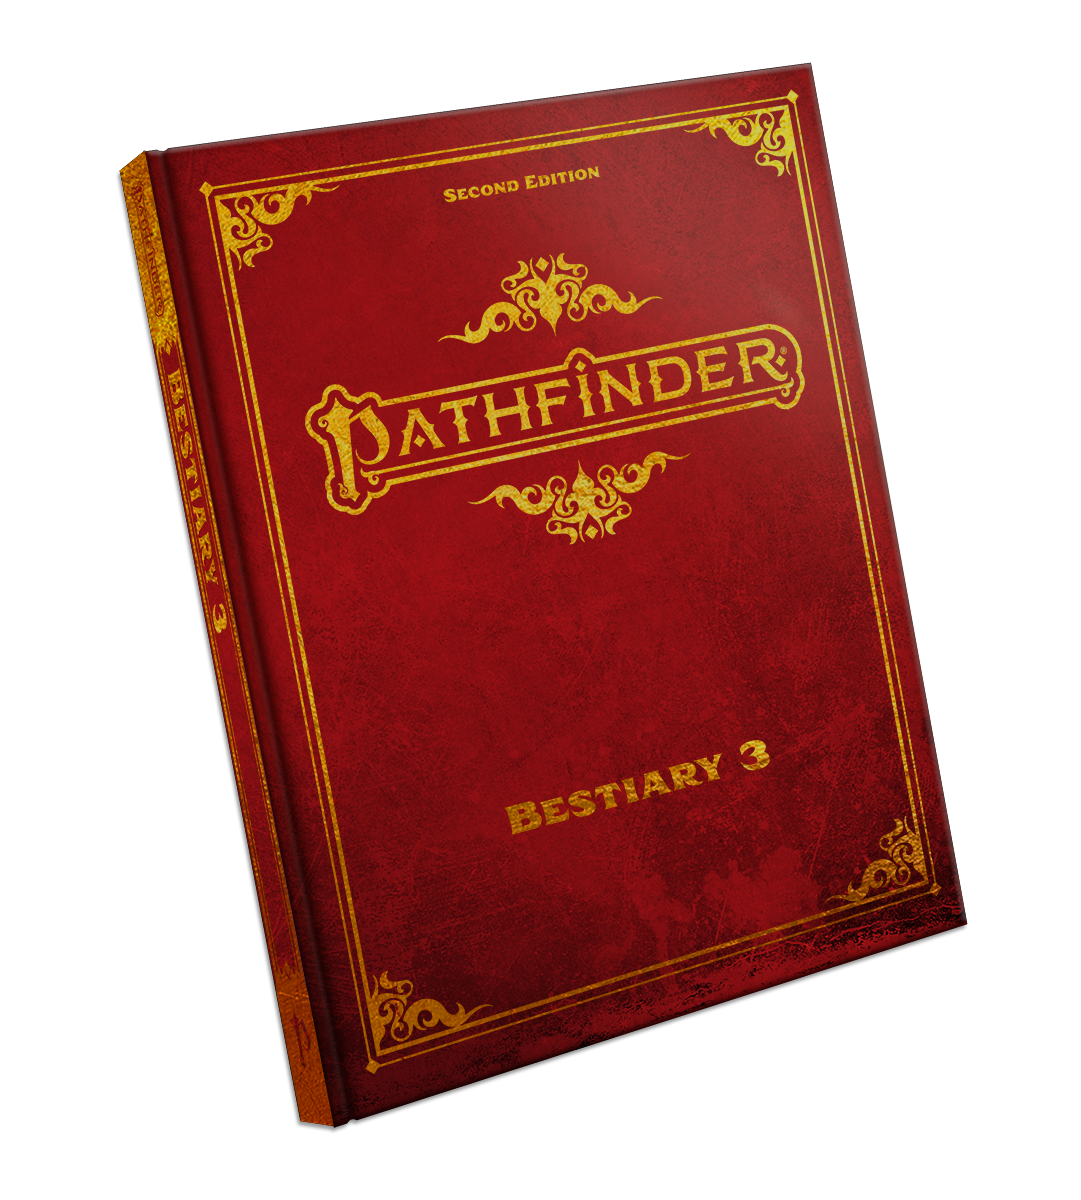 PATHFINDER 2E BESTIARY 3 SPECIAL EDITION | BD Cosmos